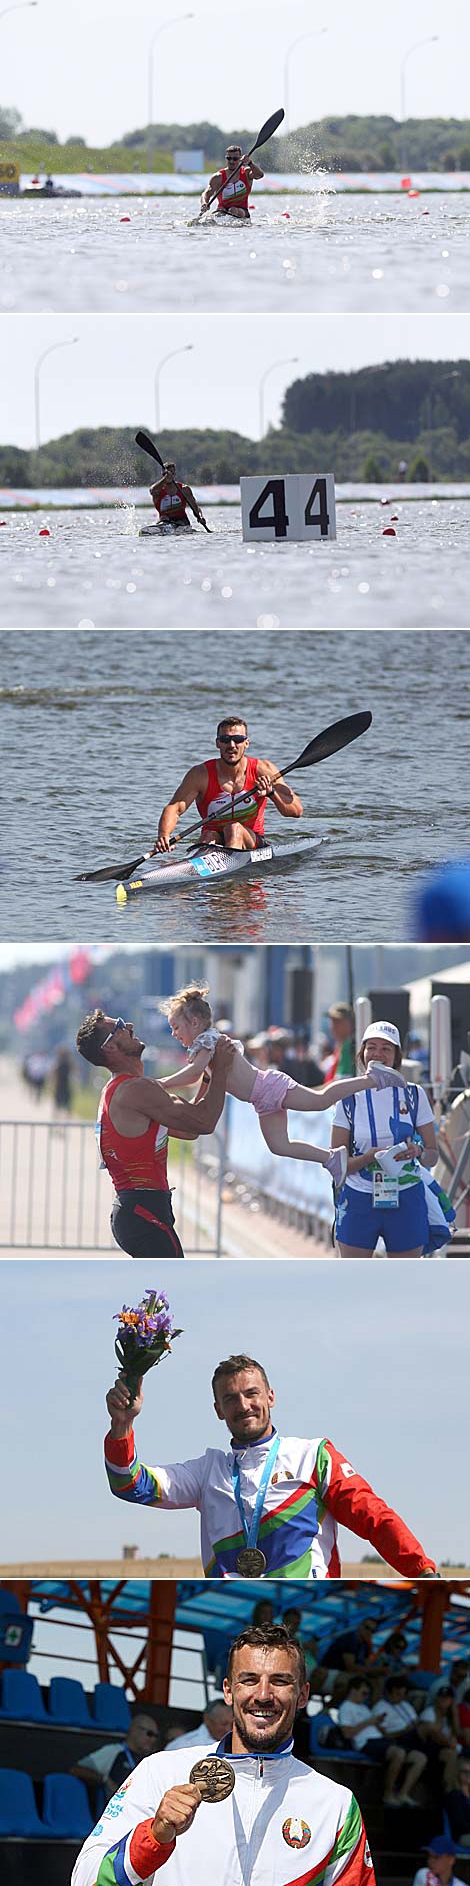 Belarus' Aleh Yurenia clinched bronze in the Men's K1 1000m at the 2nd European Games 